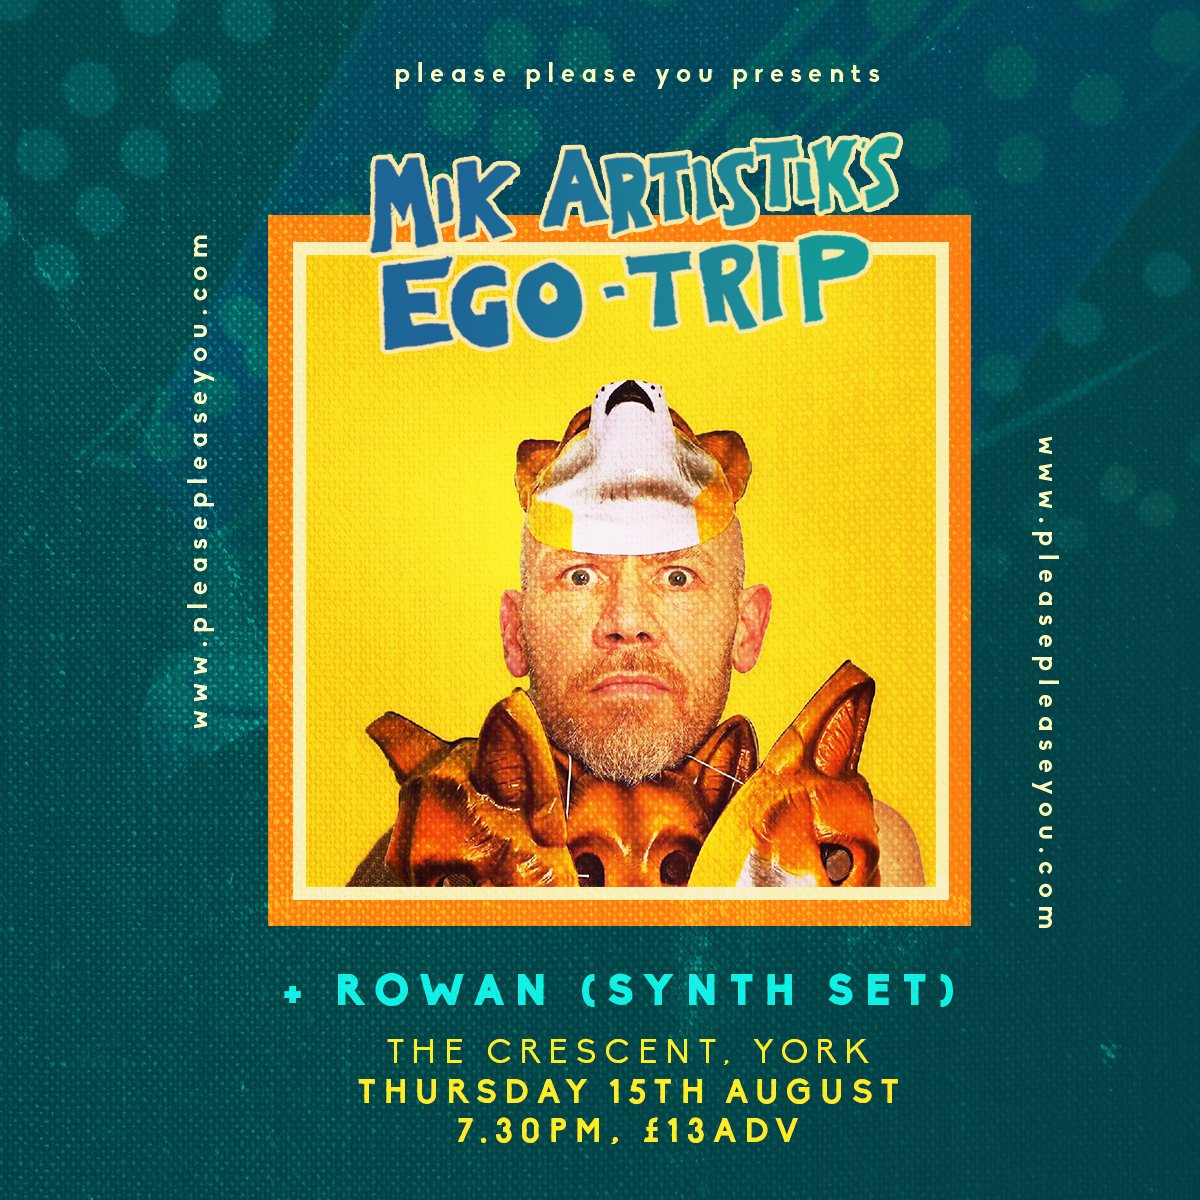 Absolute hero's @mikartistik's Ego Trip are back in The Crescent this summer! A highlight of our yearly programme, Mik's funny, insightful, compassionate and gently clever in equal measure. @rowanarthrevans (solo synth set) opens. On sale now >> thecrescentyork.com